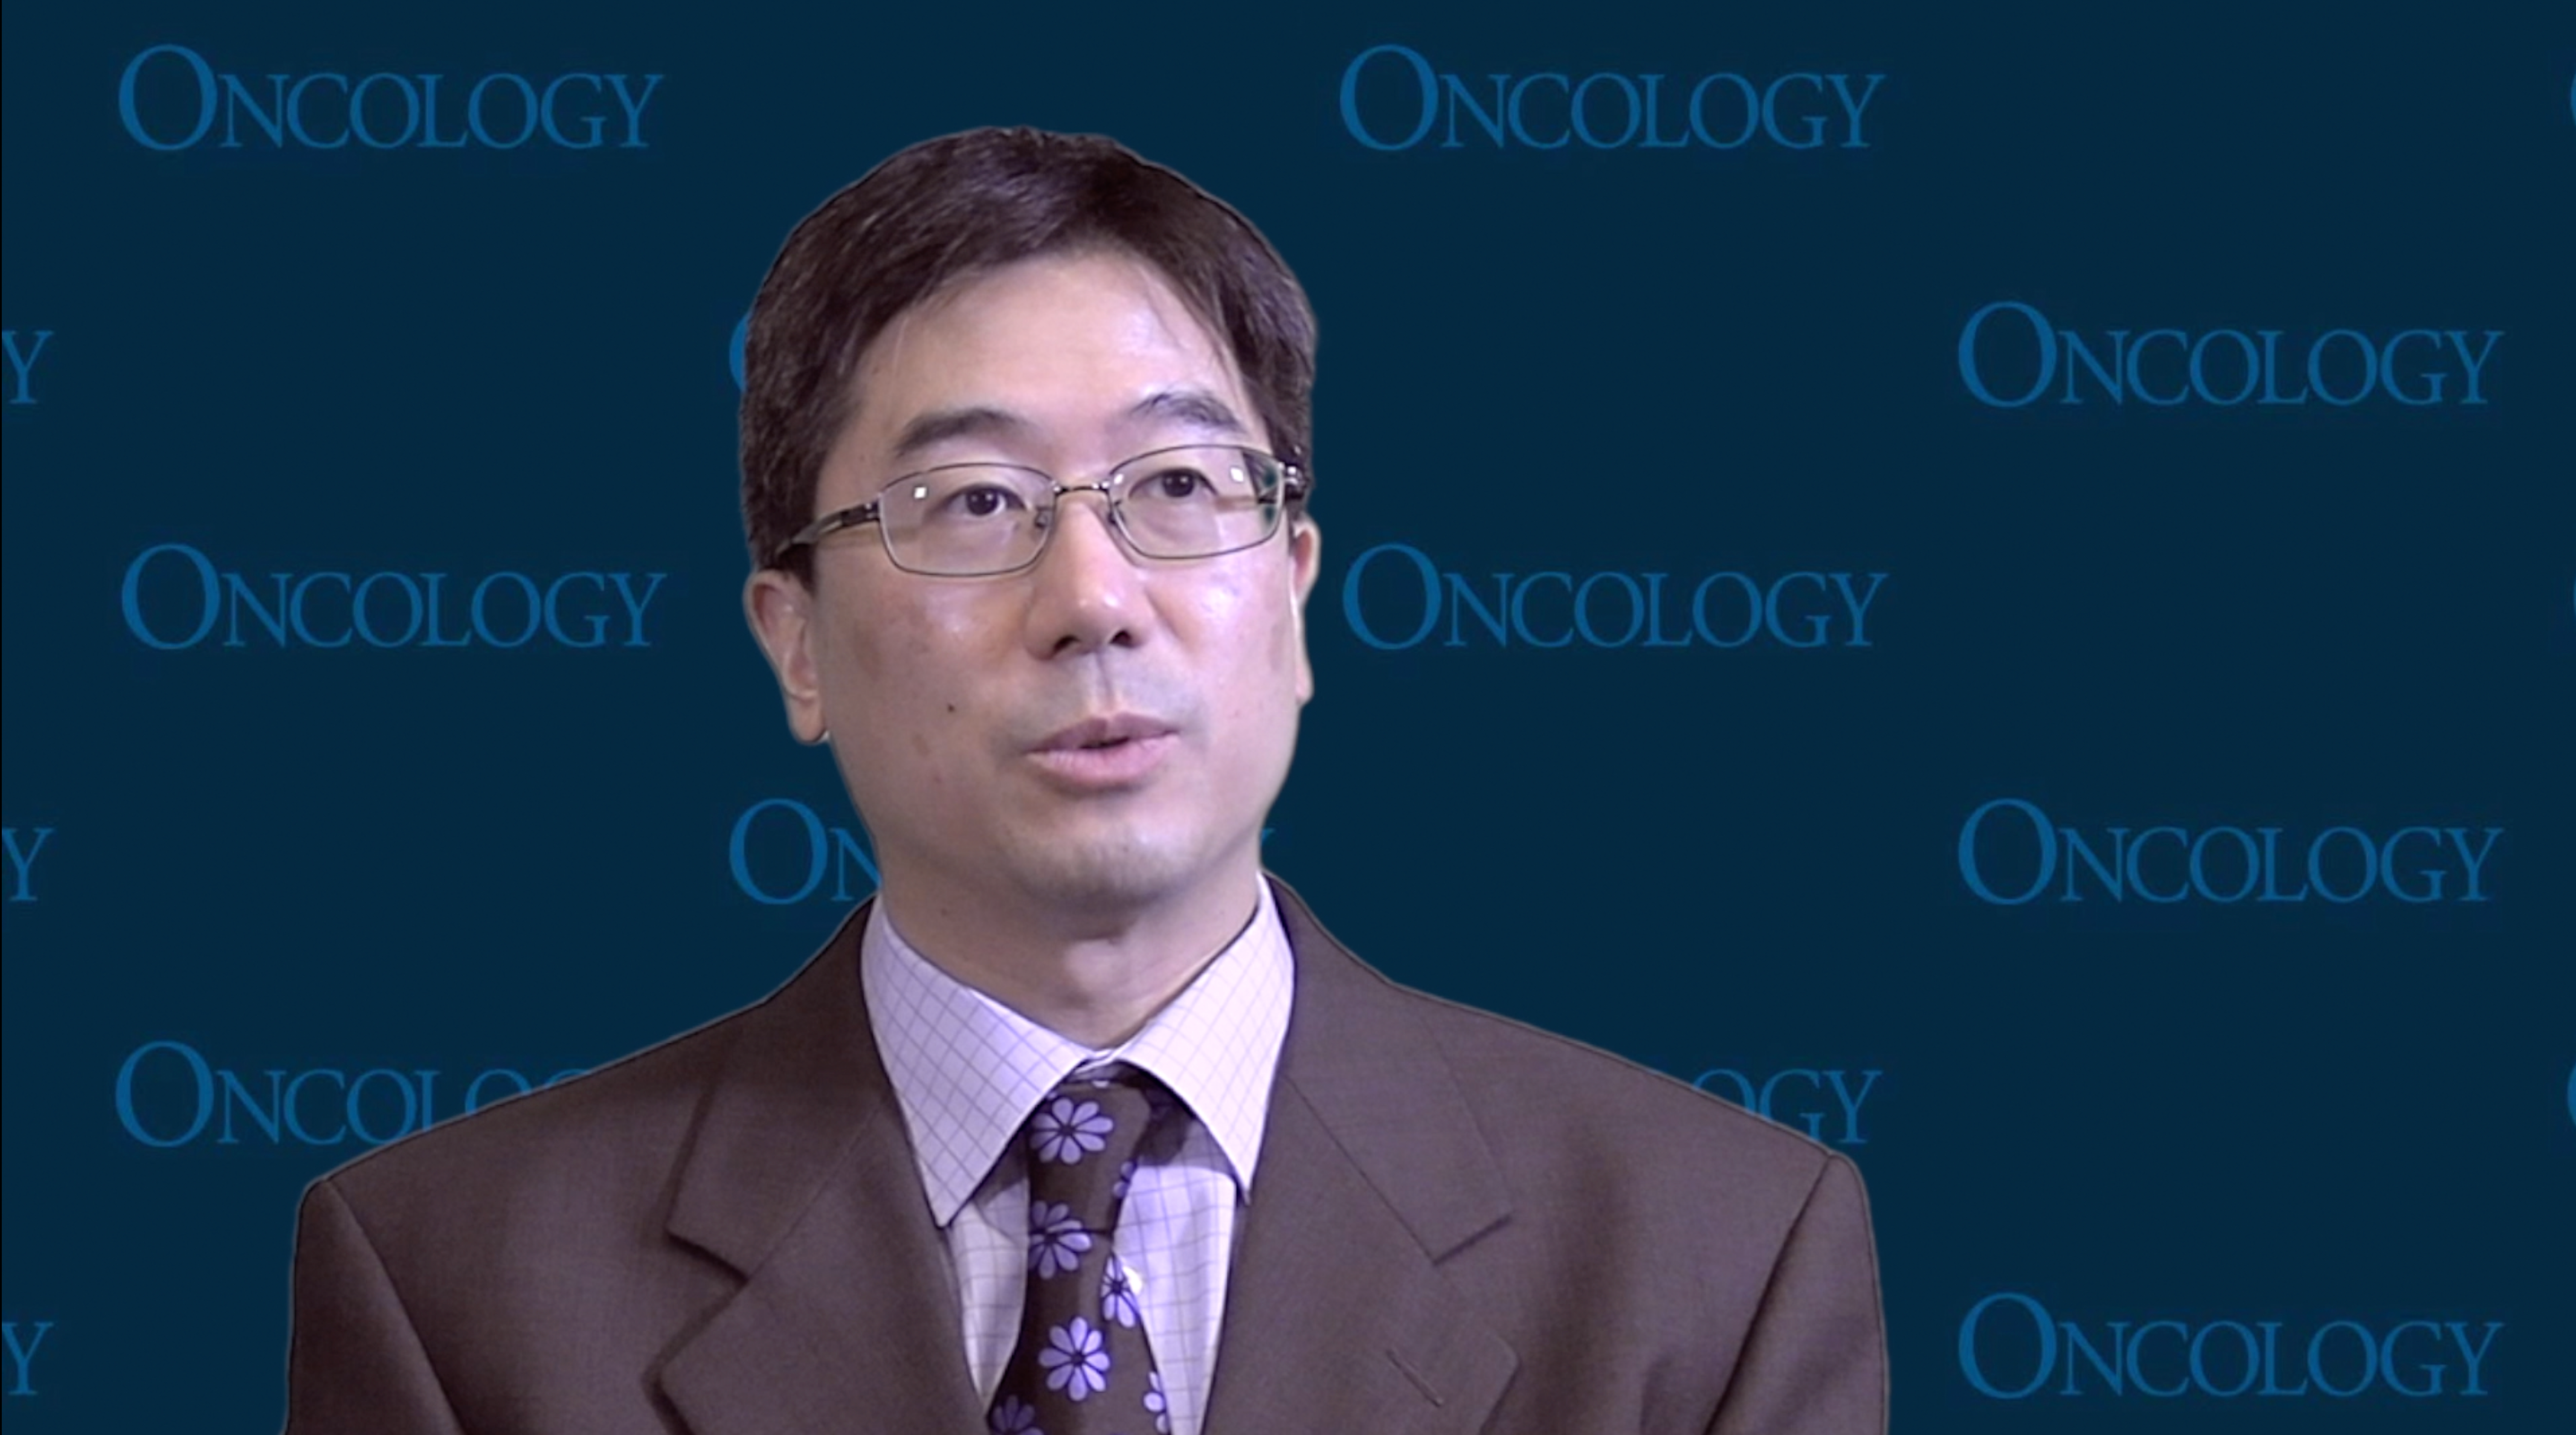 Phillip H. Kuo, MD, PhD, Examines Utility of PSMA-PET Parameters to Predict Response to 177Lu-PSMA-617 in mCRPC